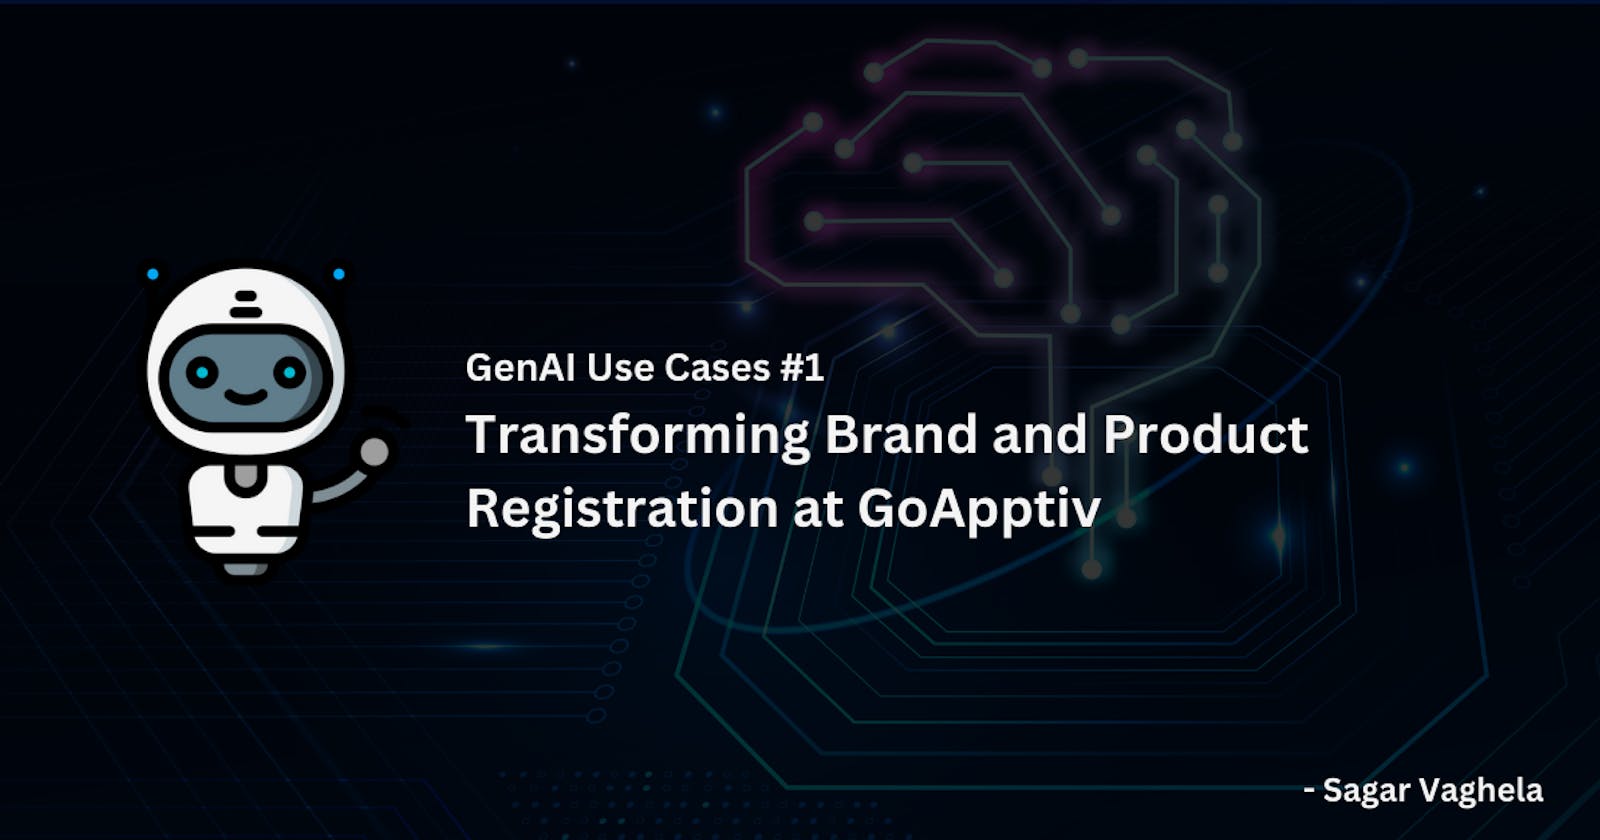 GenAI Use Cases #1: Transforming Brand and Product Registration at GoApptiv